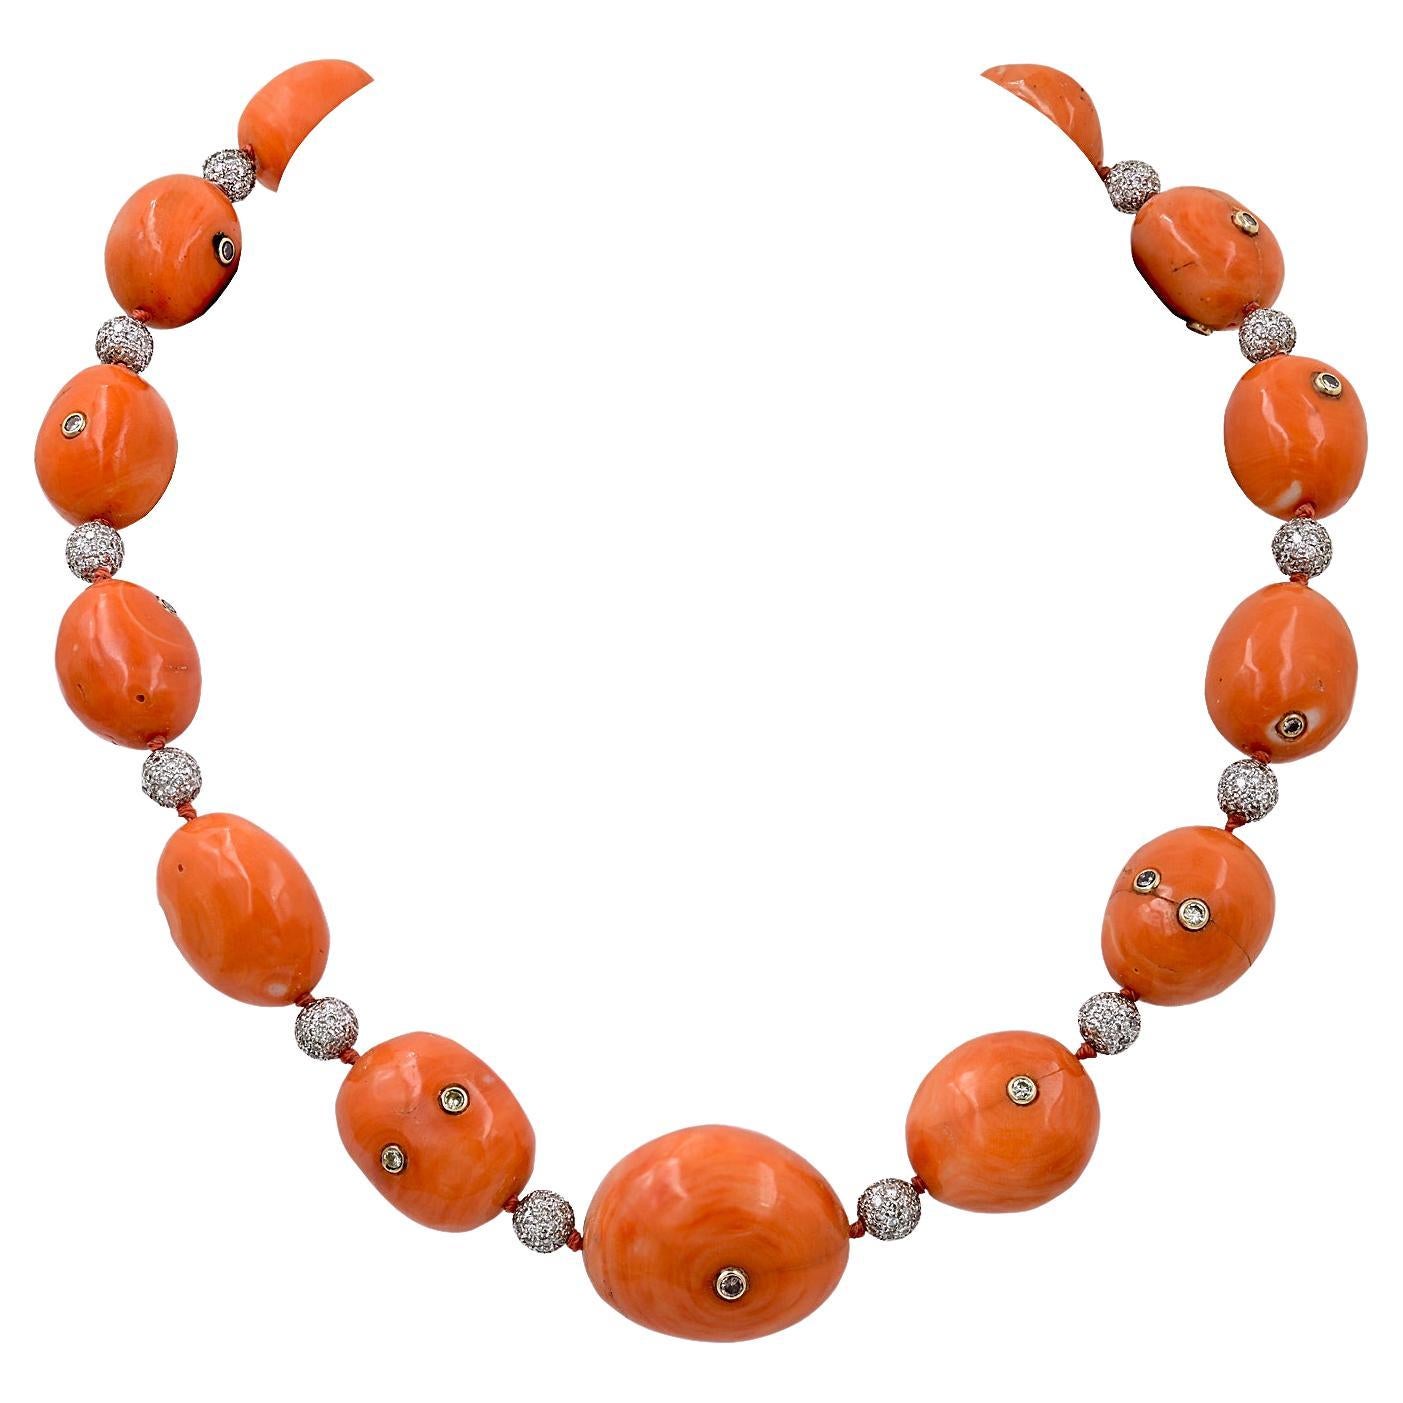 Japanese Coral Beads and Diamond Balls Necklace For Sale